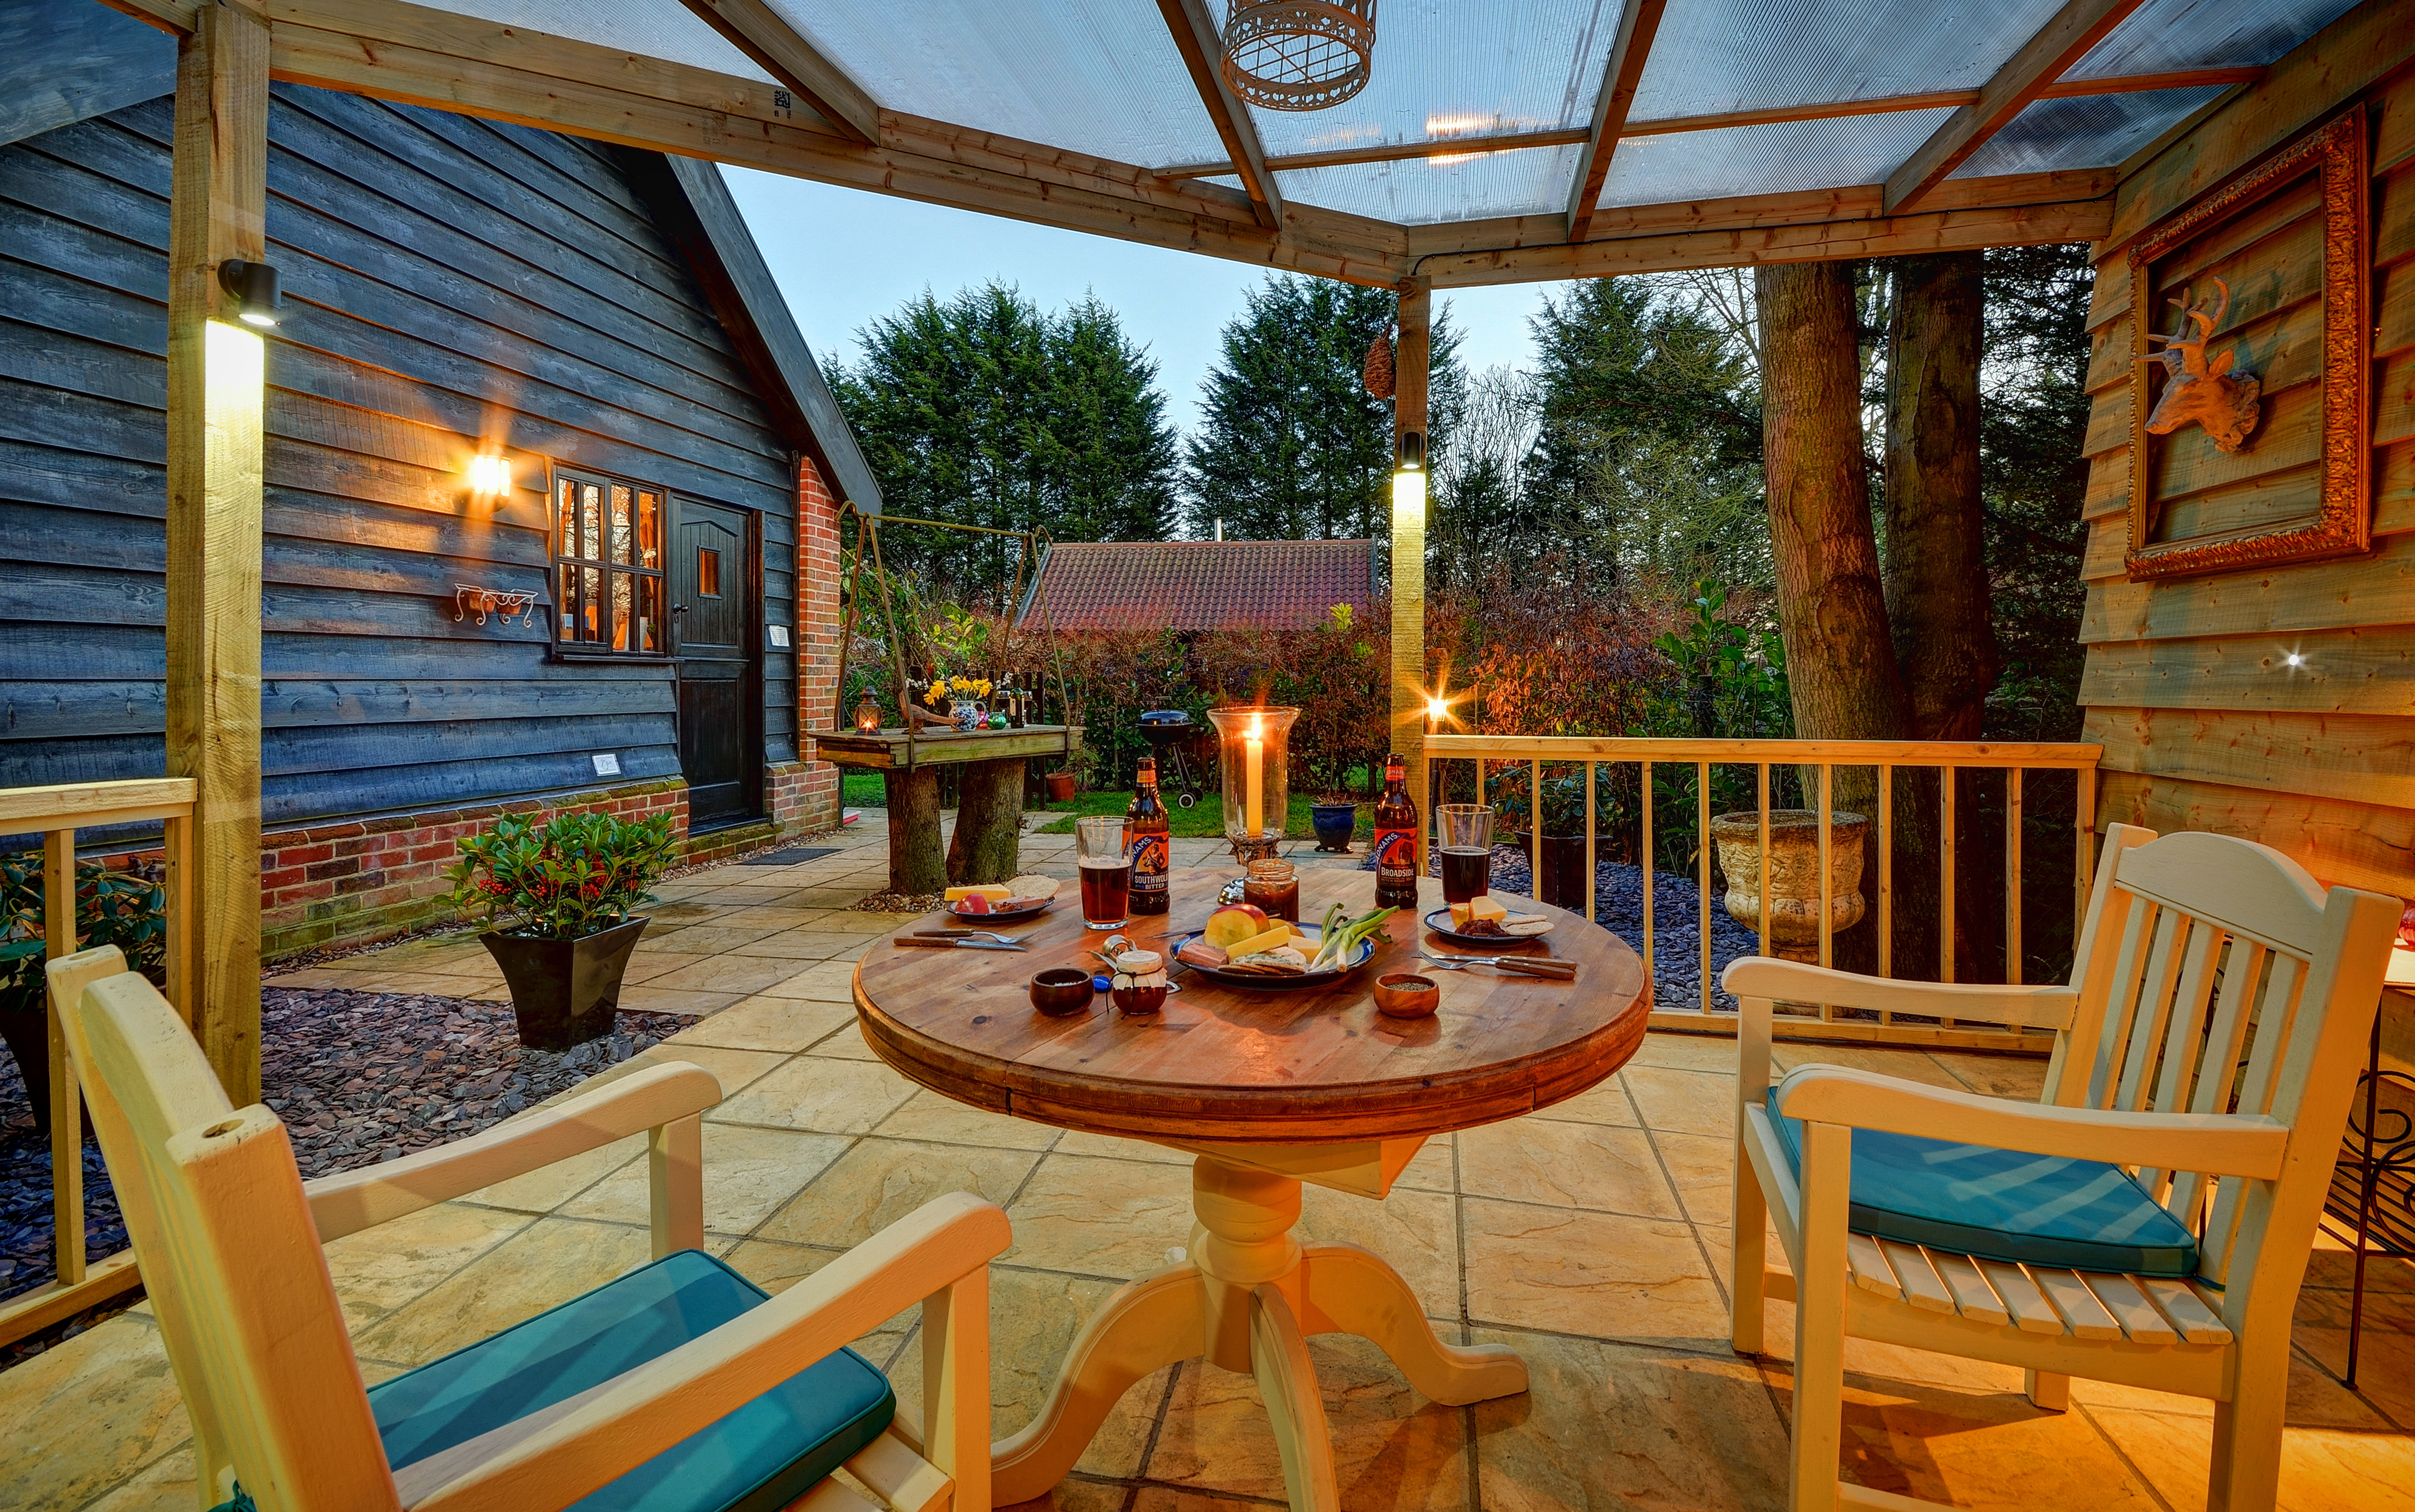 Al Fresco dining in ur holiday cottages in Suffolk